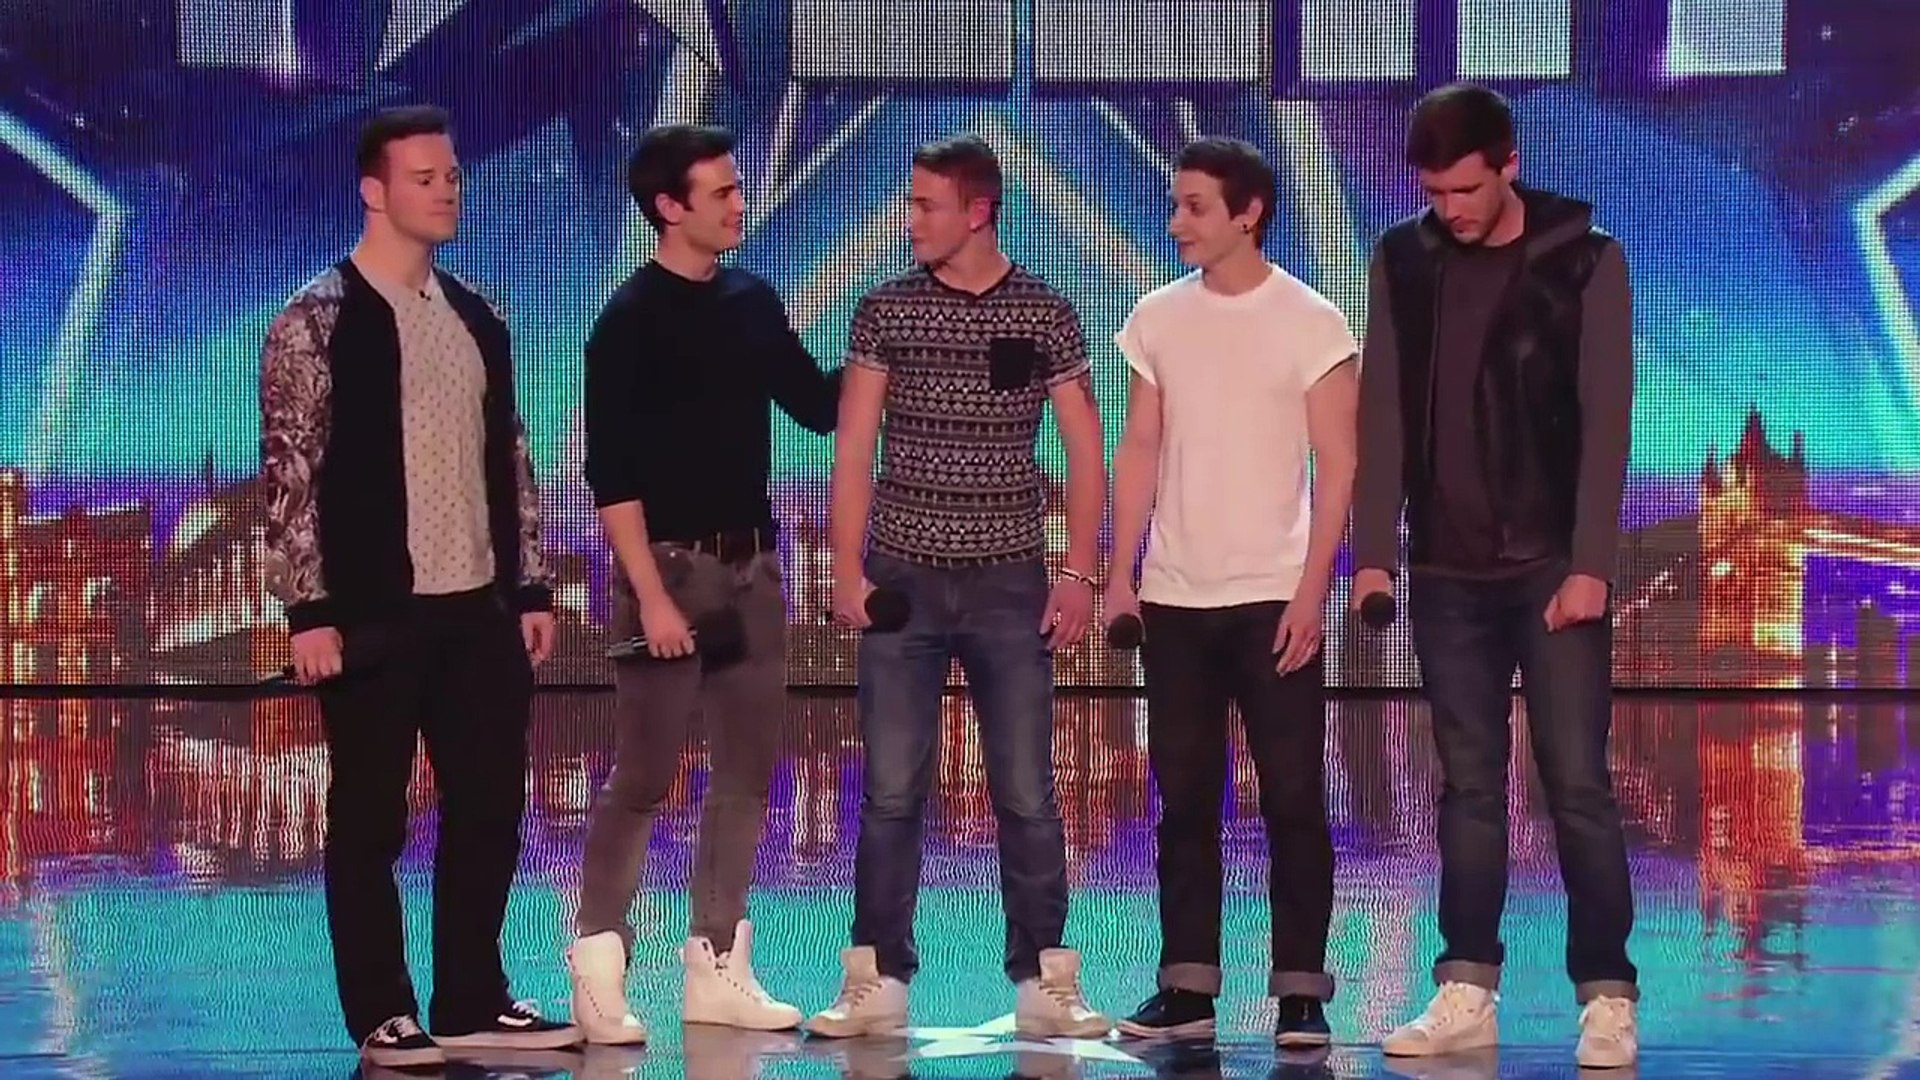 Simon rolled his eyes at this unique boyband _ Britain's Got Talent Unforgettable Audition